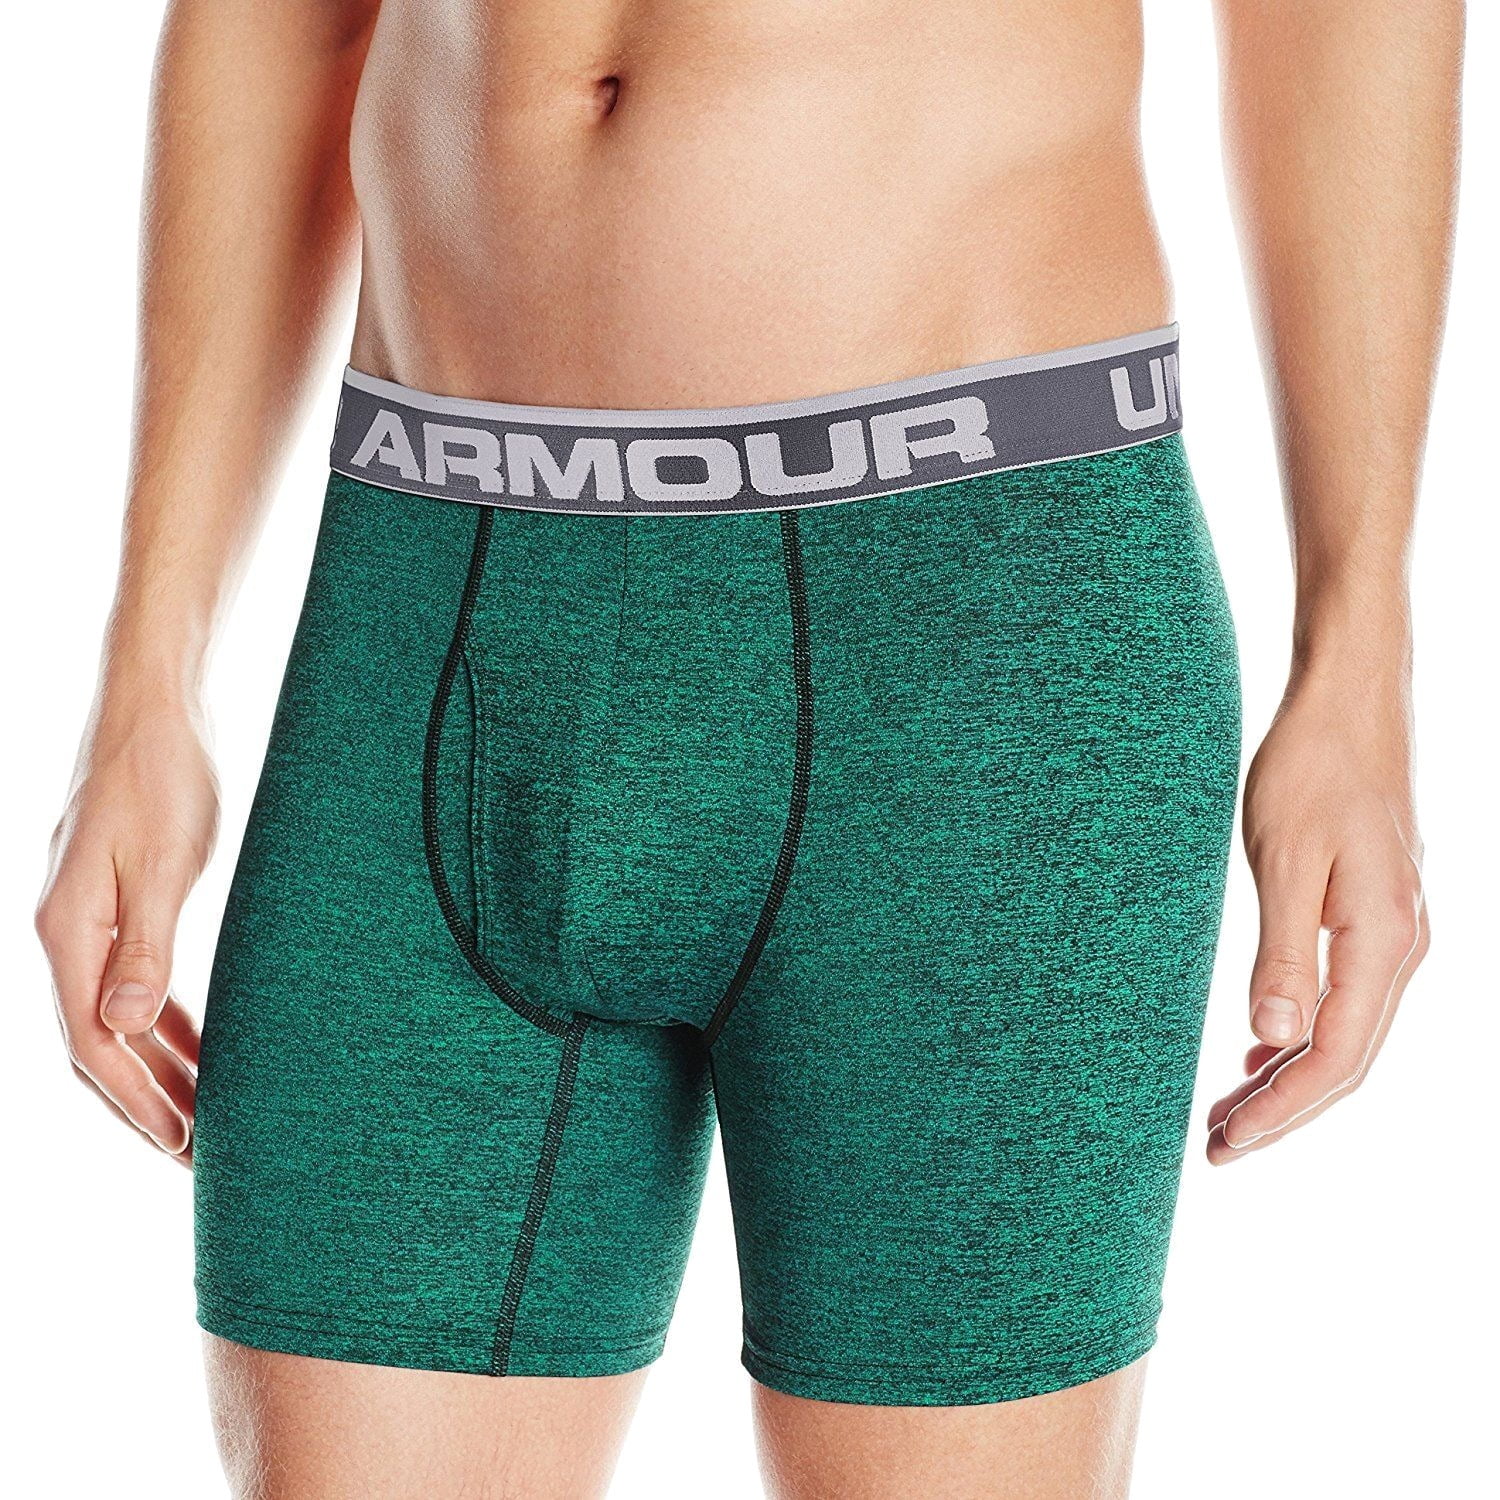 Under Armour NEW Green Mens Size Small S Stretch Boxer Brief Underwear 202  